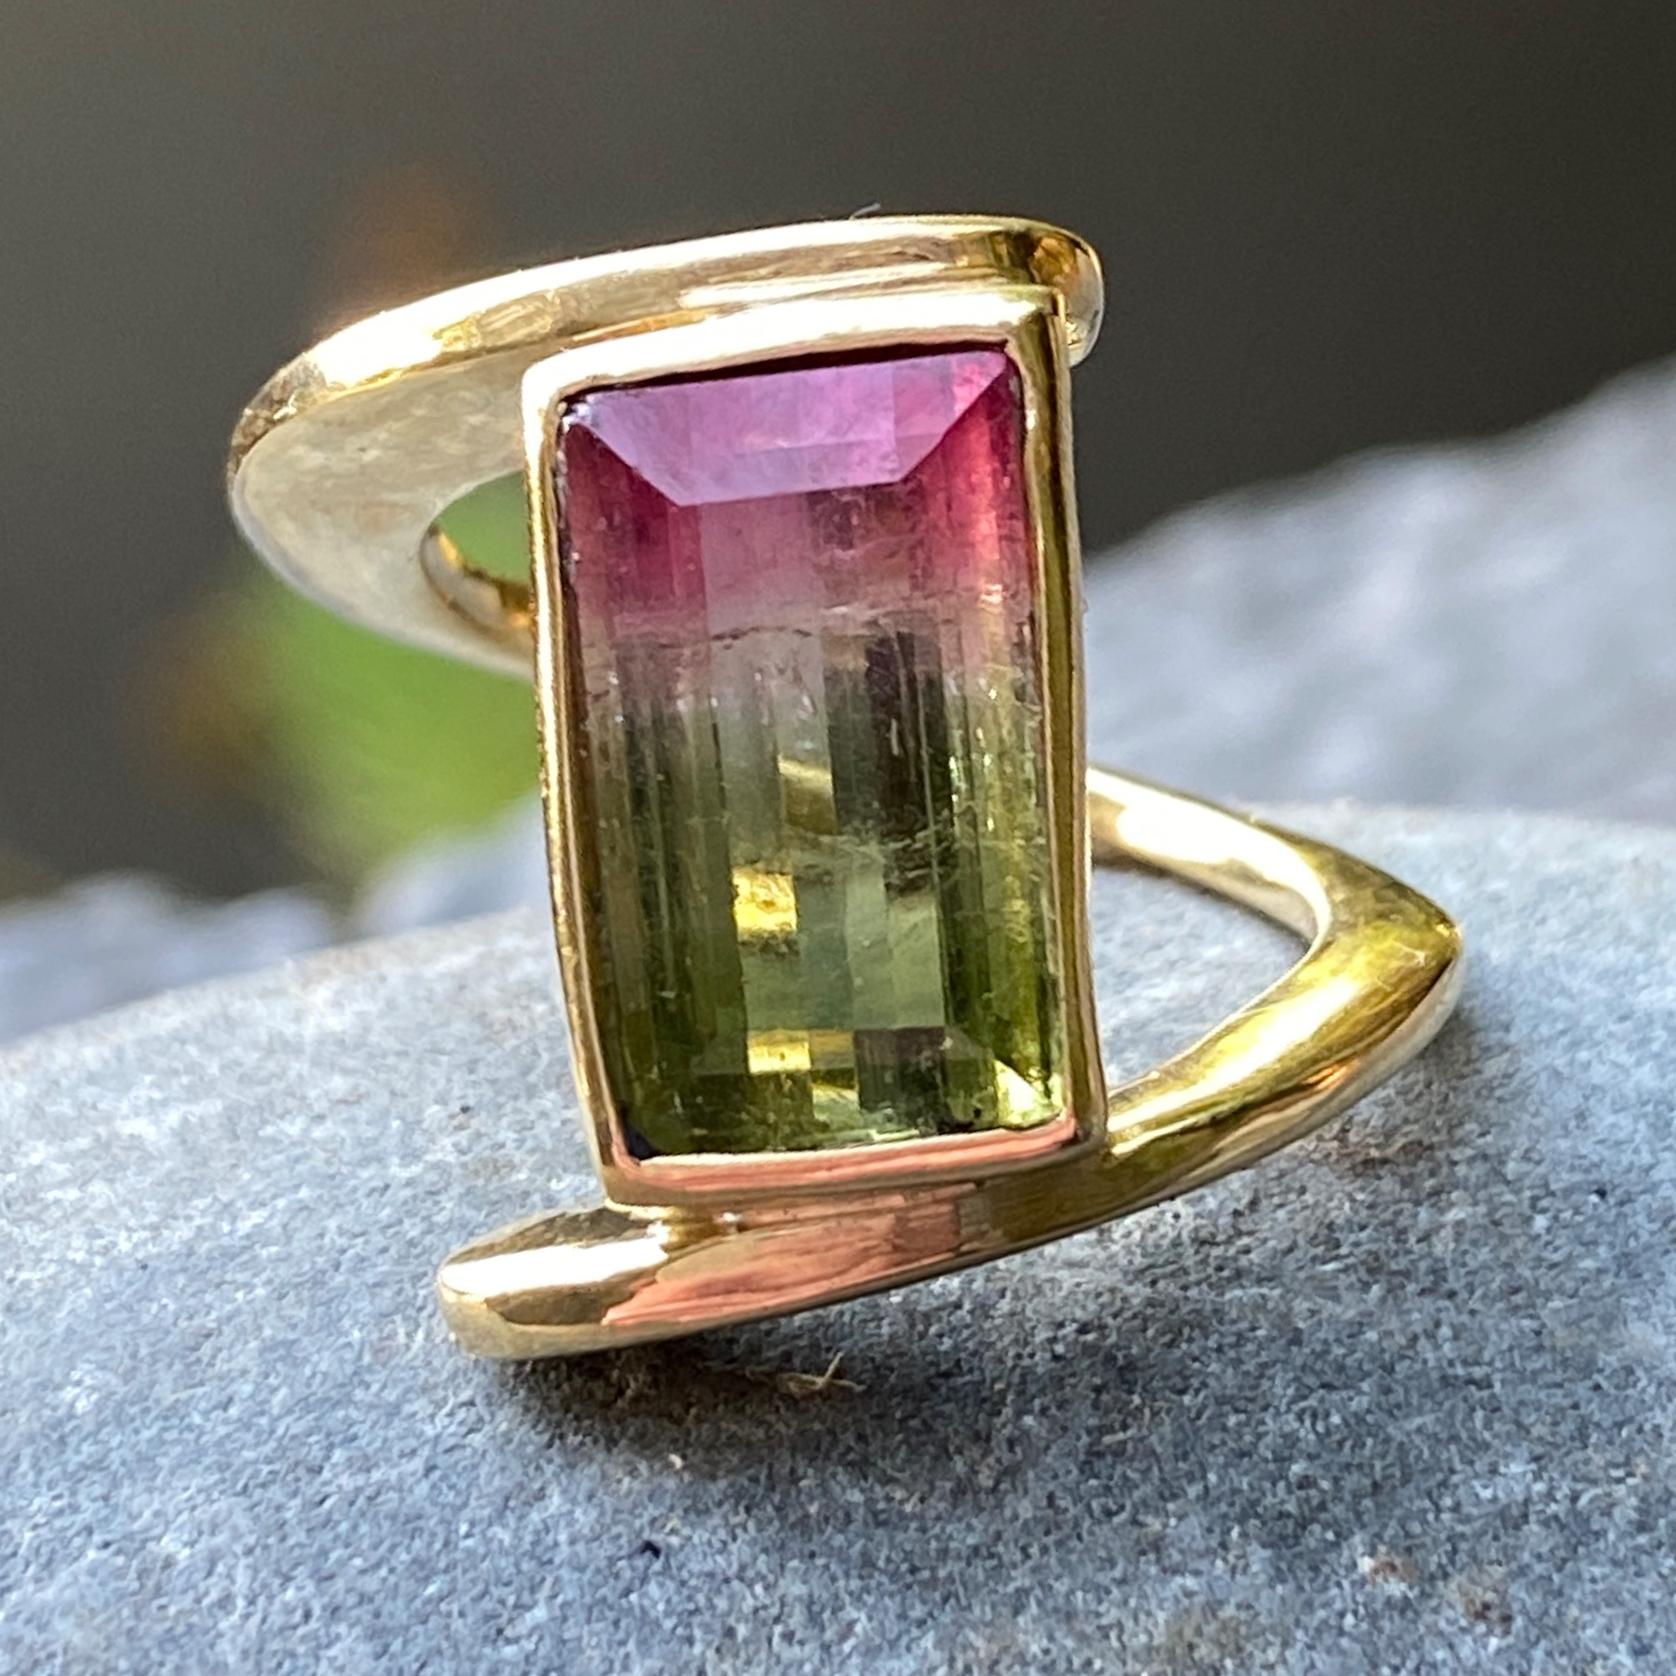 This unusual new ring by Eytan Brandes features a spiral stone-girding design he's used with many different gemstones.  This is a particularly dramatic version as it involves a huge spread to accommodate a delicious, vertically oriented watermelon